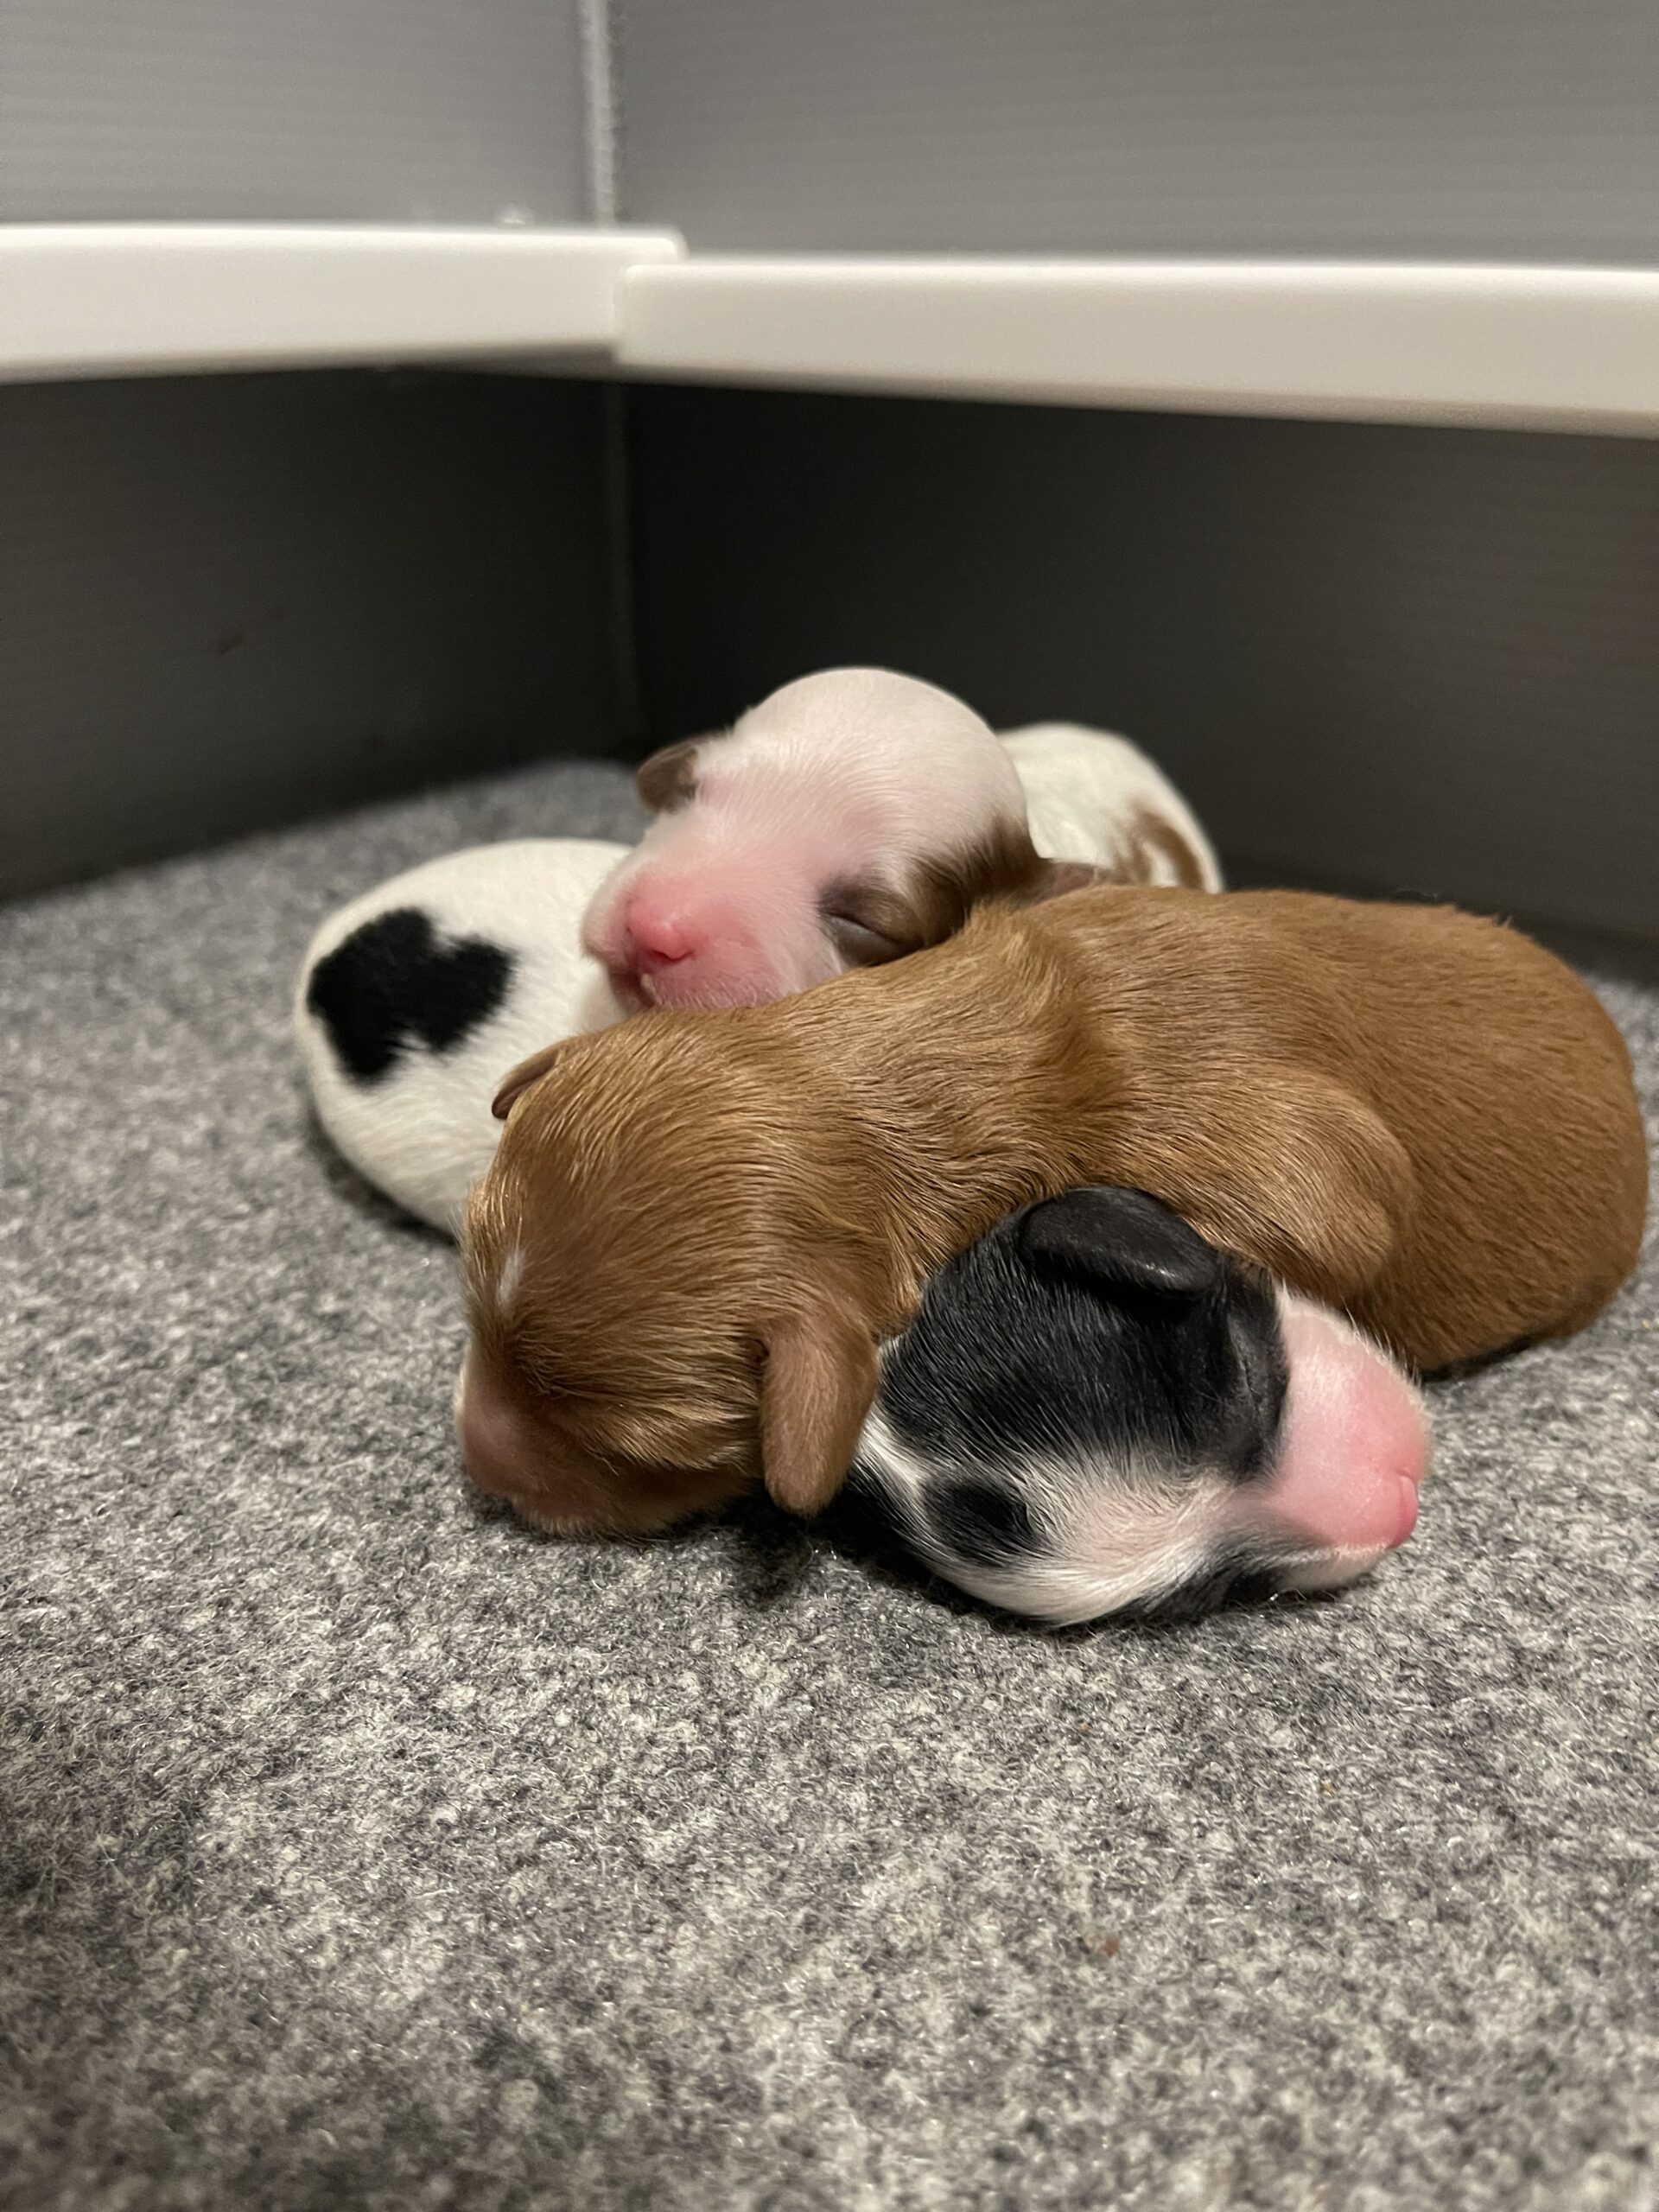 a small pile of puppies!. It is hard to see where one begins and anopther ends, they are piled on top of each other and sleeping. There is a black and white parti, a chocolate and a brown and white parti, the brown and white one's face is showing to the camera.